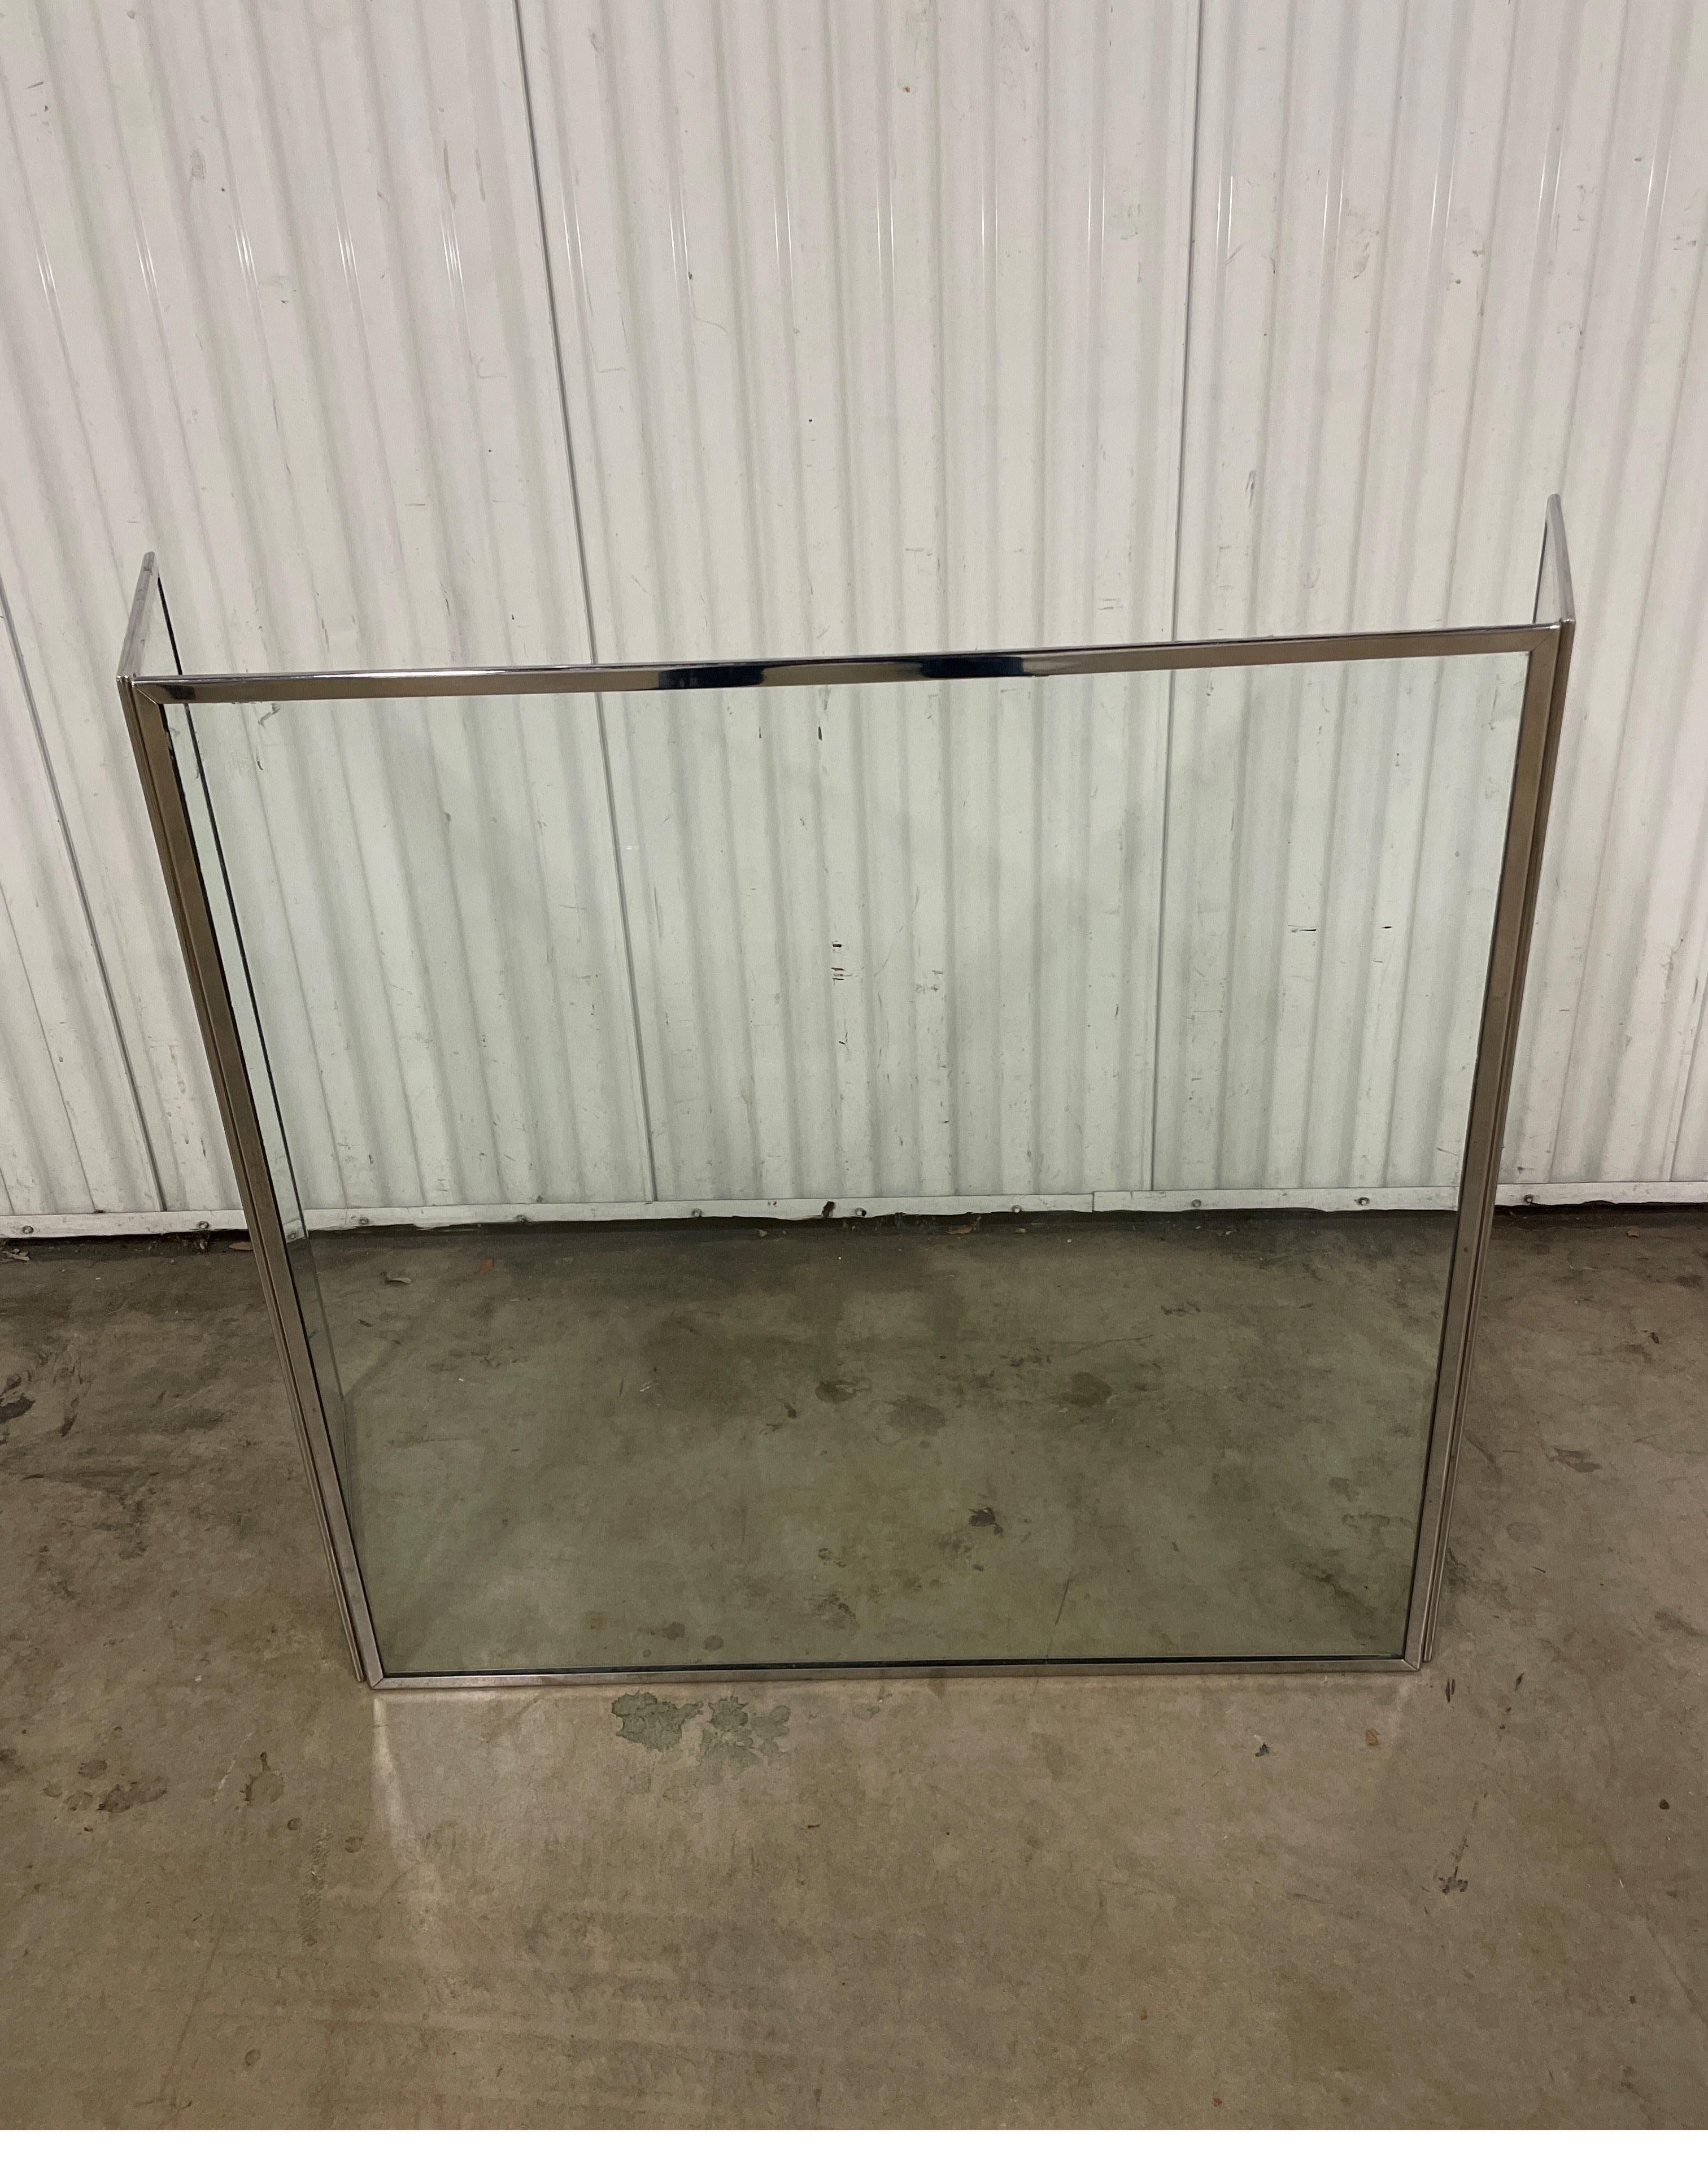 Classic chrome and glass fireplace screen by Danny Alessandro. The screen measures 30.25 inches high. The center portion is 30.25 inches & the two side panels are 13.25 inches each.